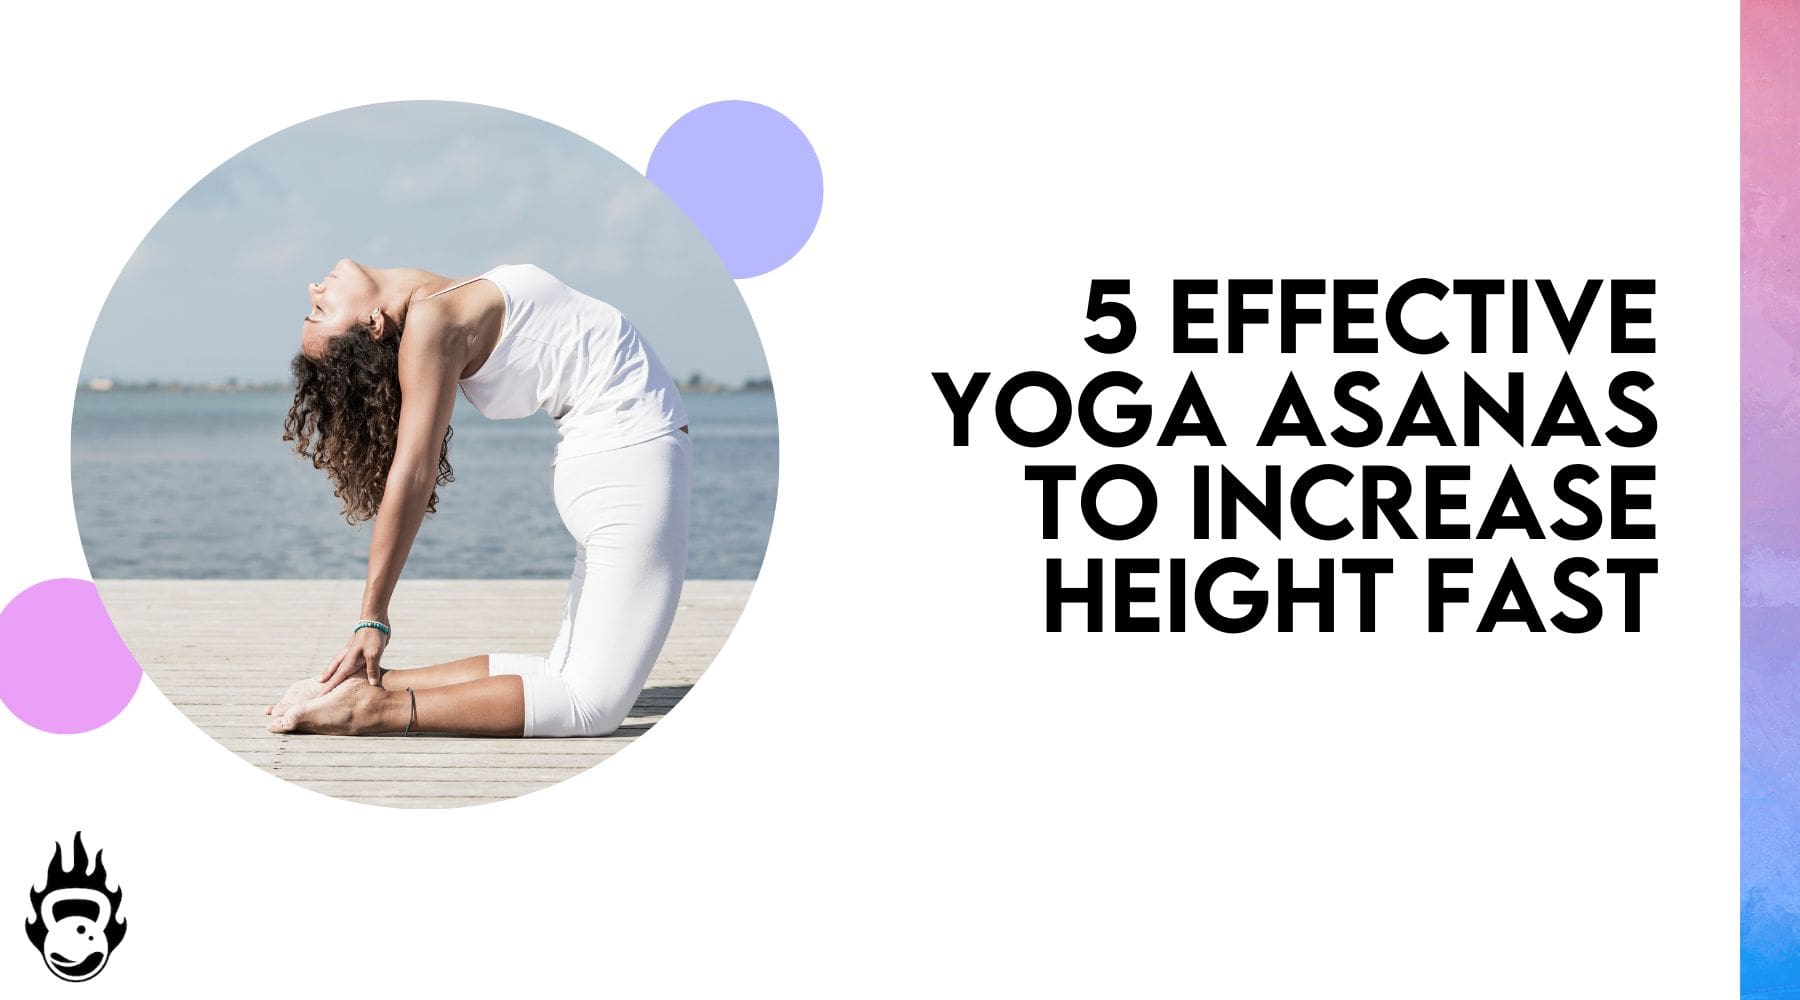 20 Hard Yoga Poses With Pictures, And How To Do Each One